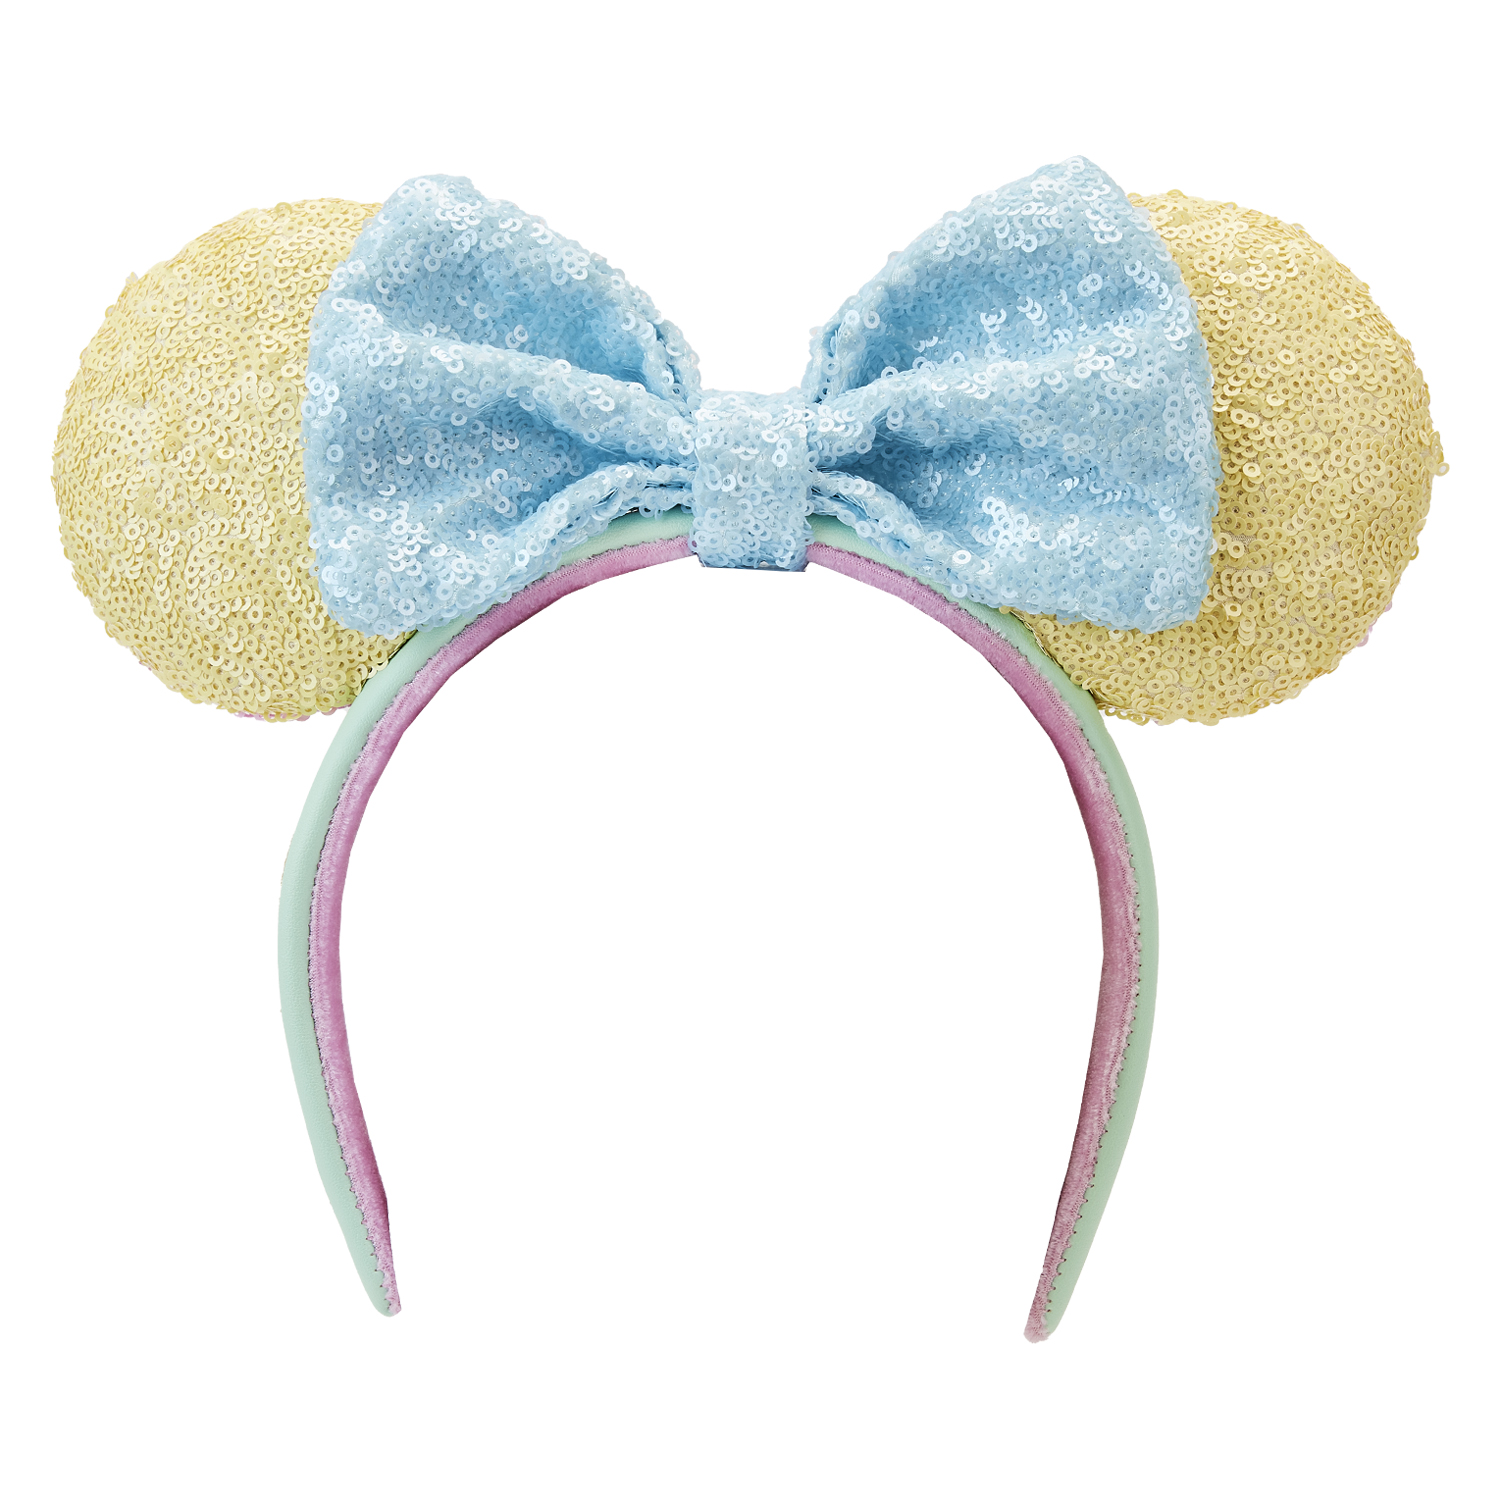 New Gold and Blue Sequined Minnie Ear Headband Shines at